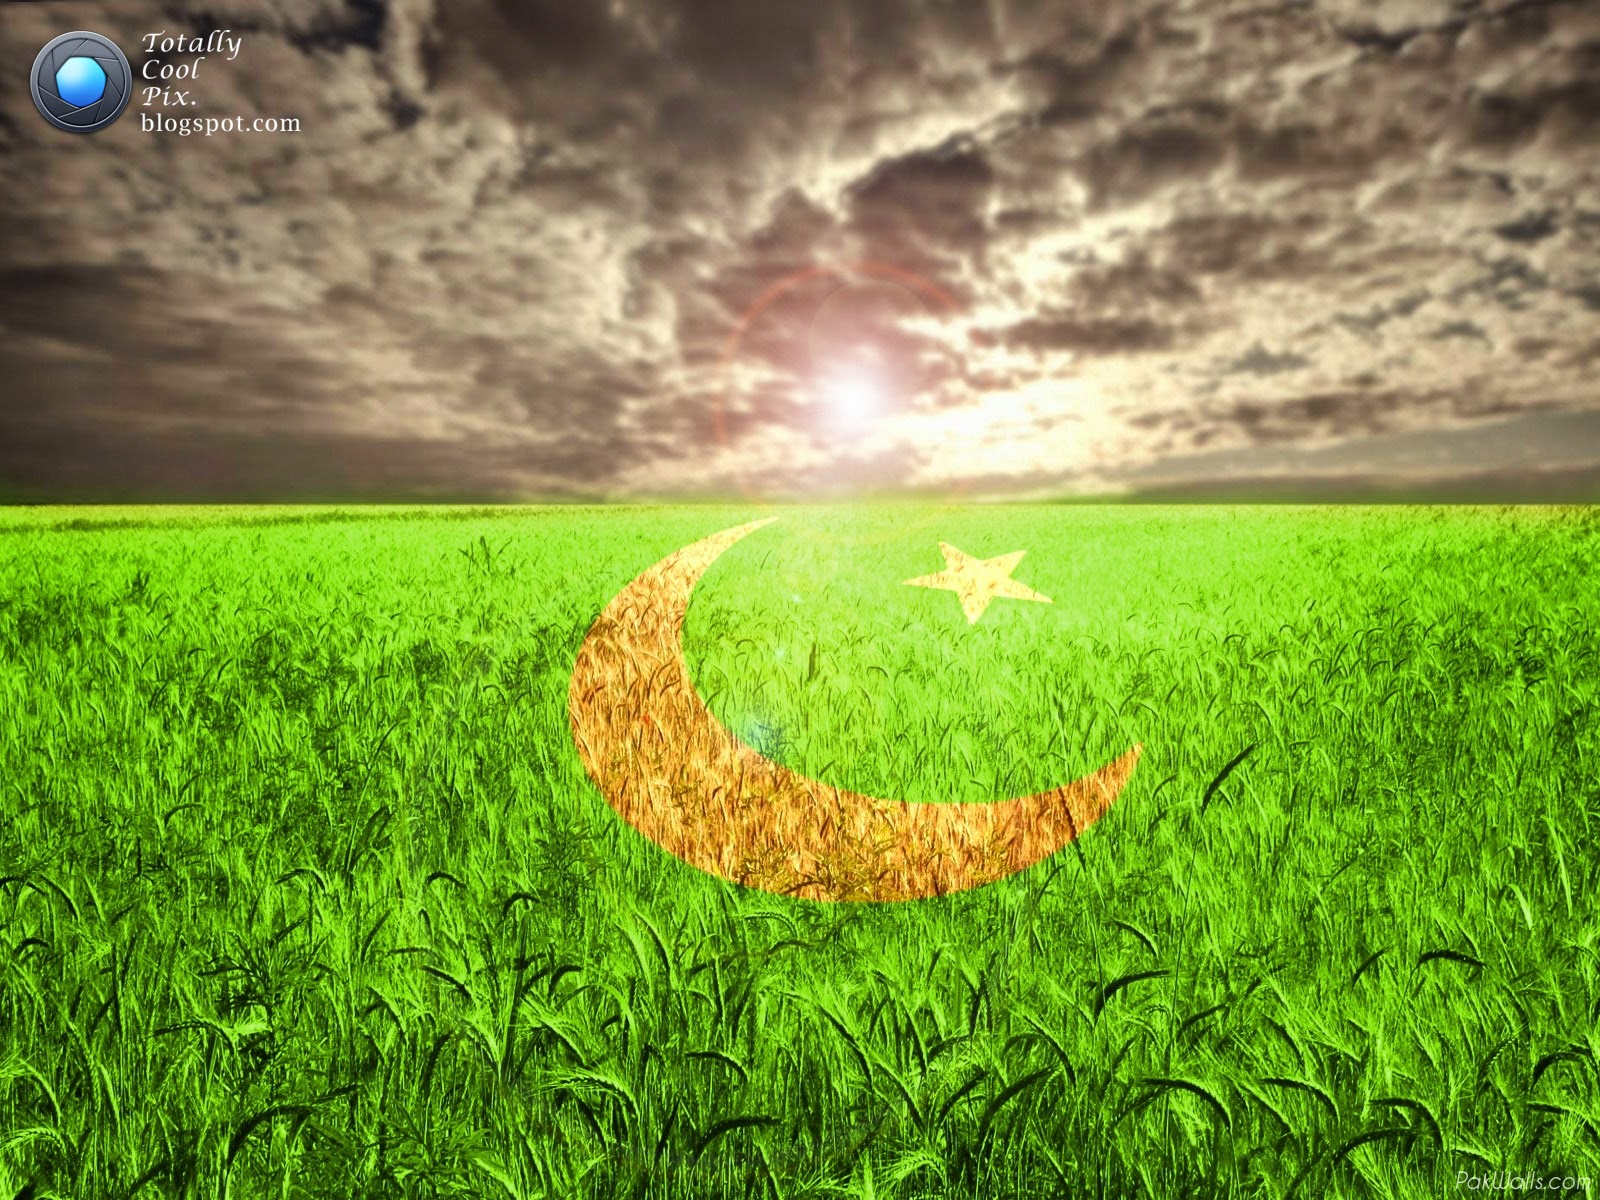 pakistan-independence-day-2014-hd-wallpapers-hd-wallpapers-blog